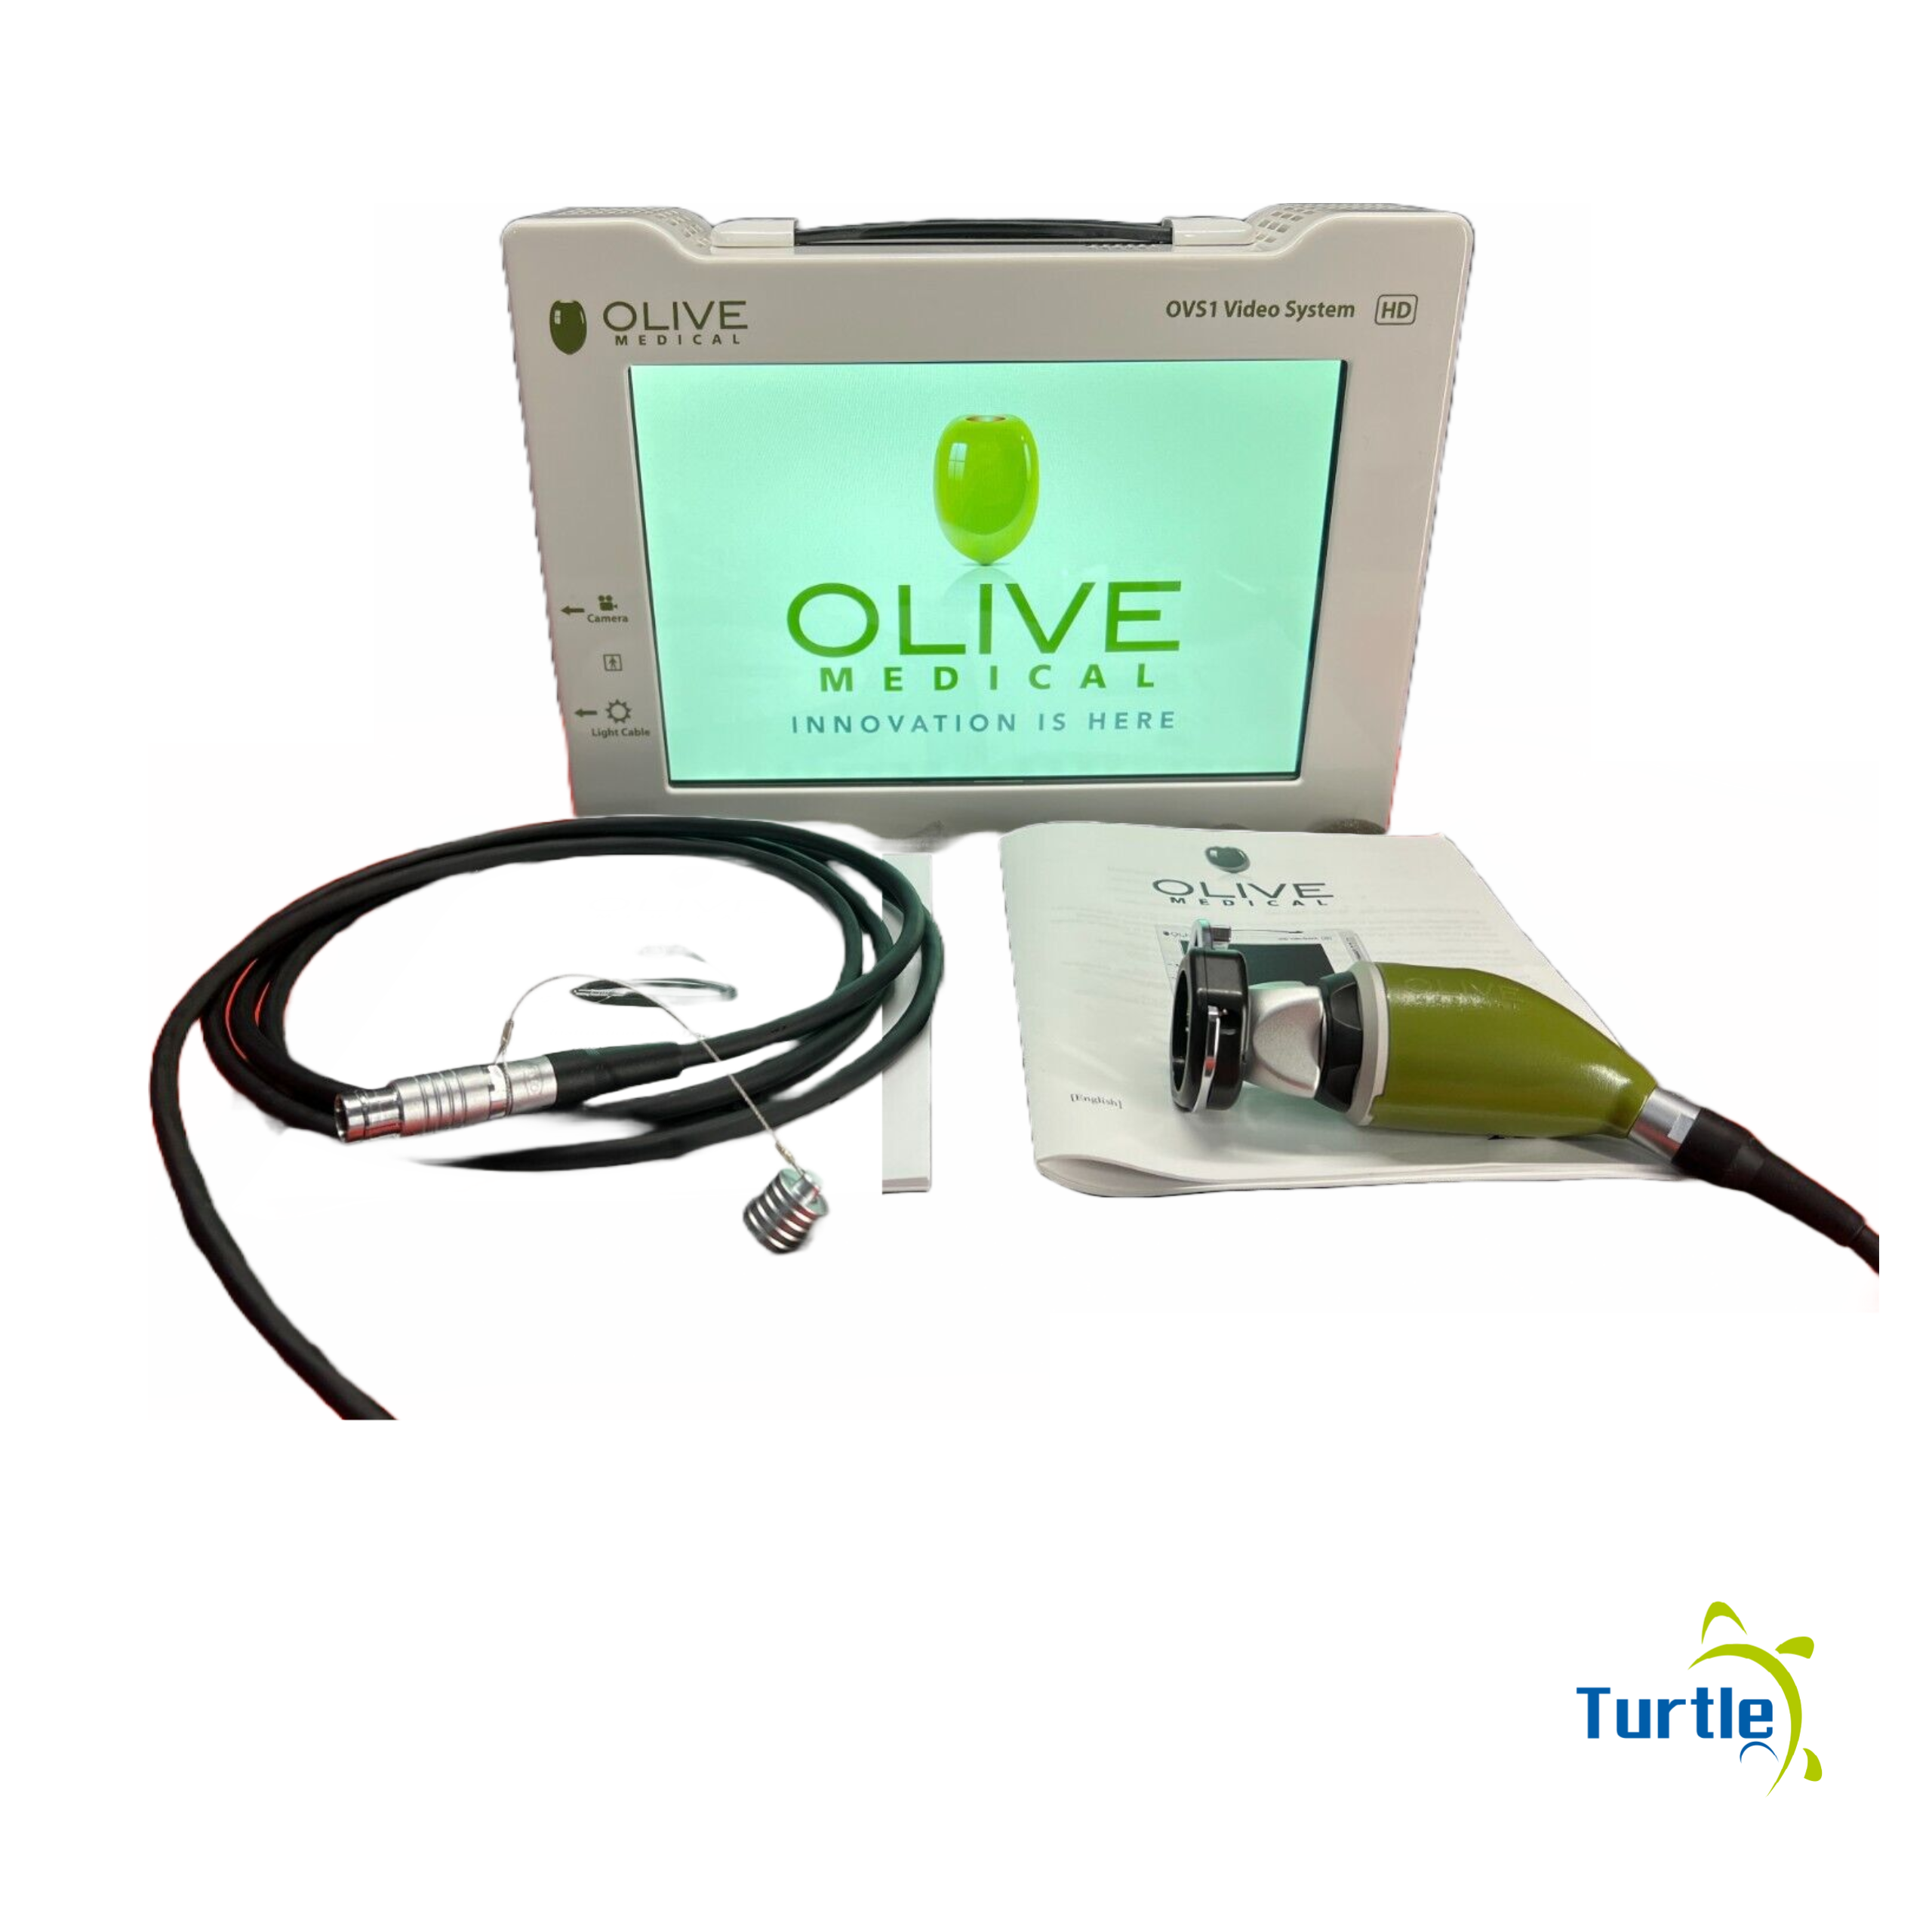 OLIVE Medical OVS1 Video System HD Portable All-In-One System w/ Storz F/O Cable